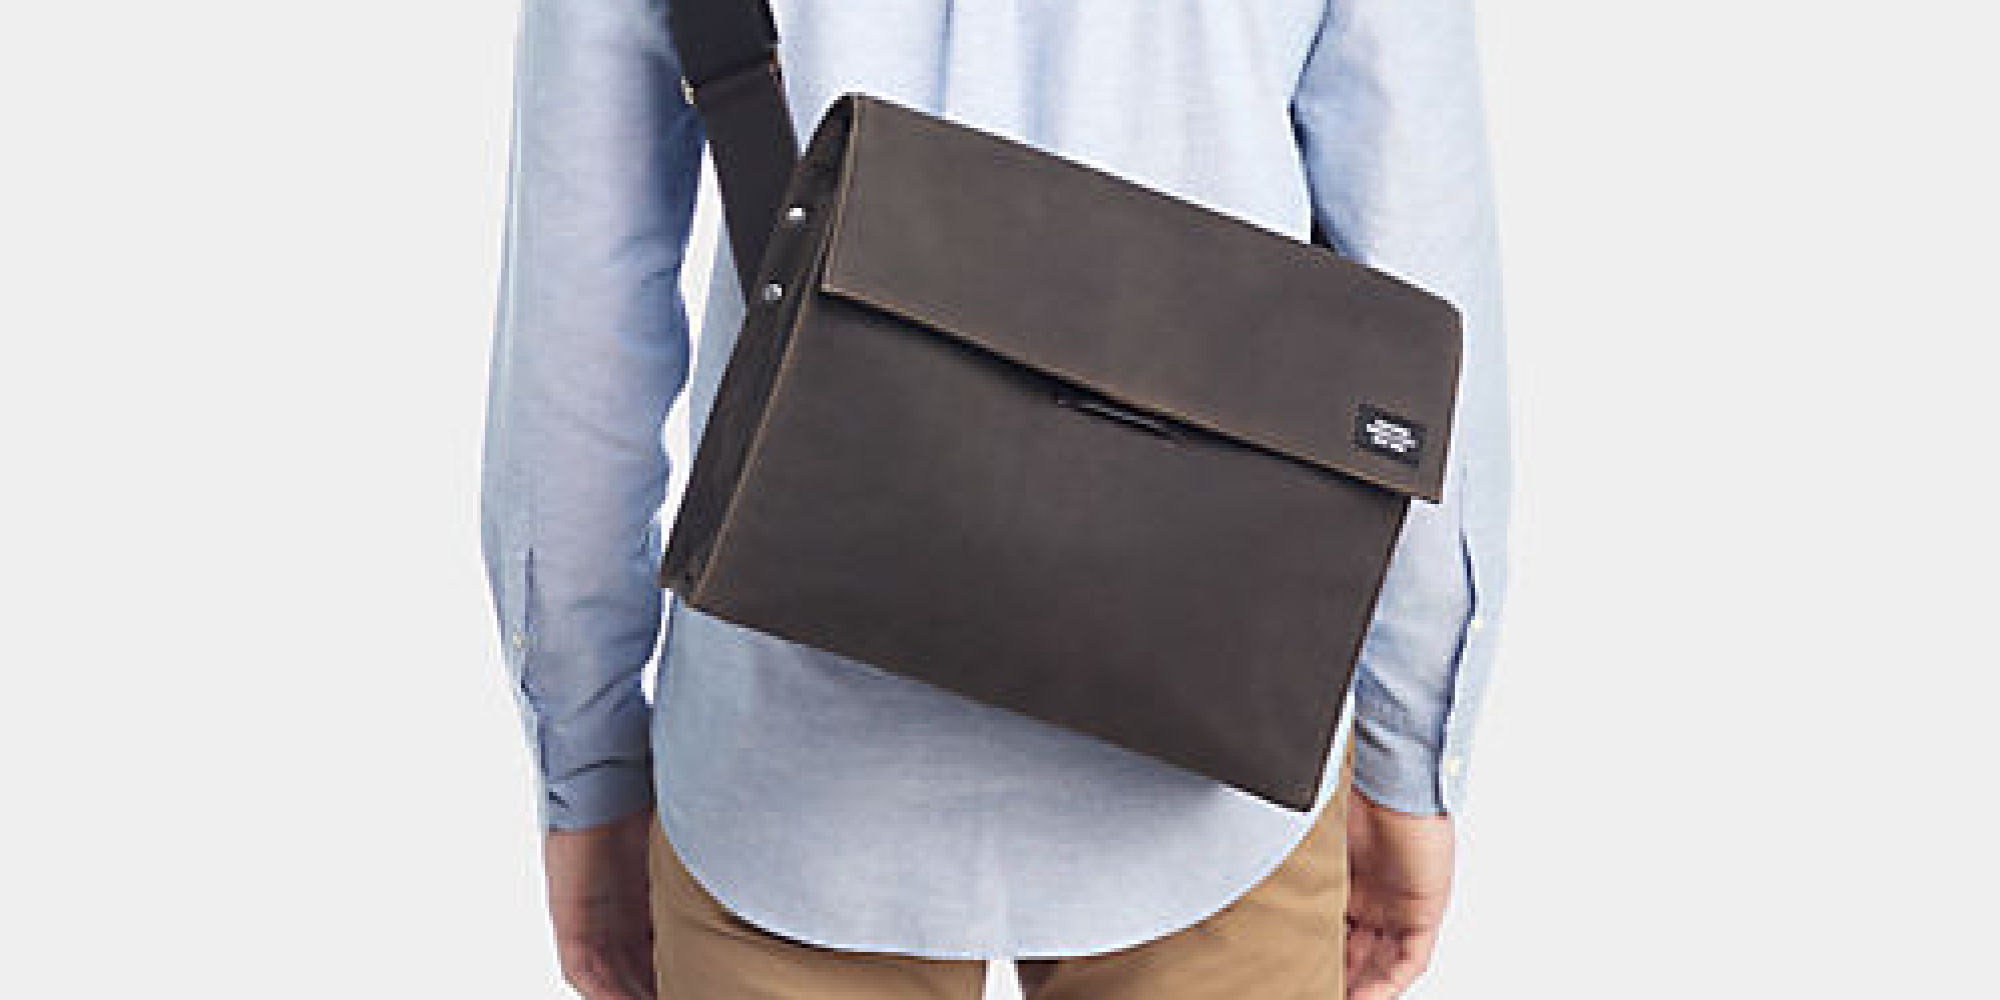 Guys, Here Are 5 Bags That Don't Look Like Purses | HuffPost